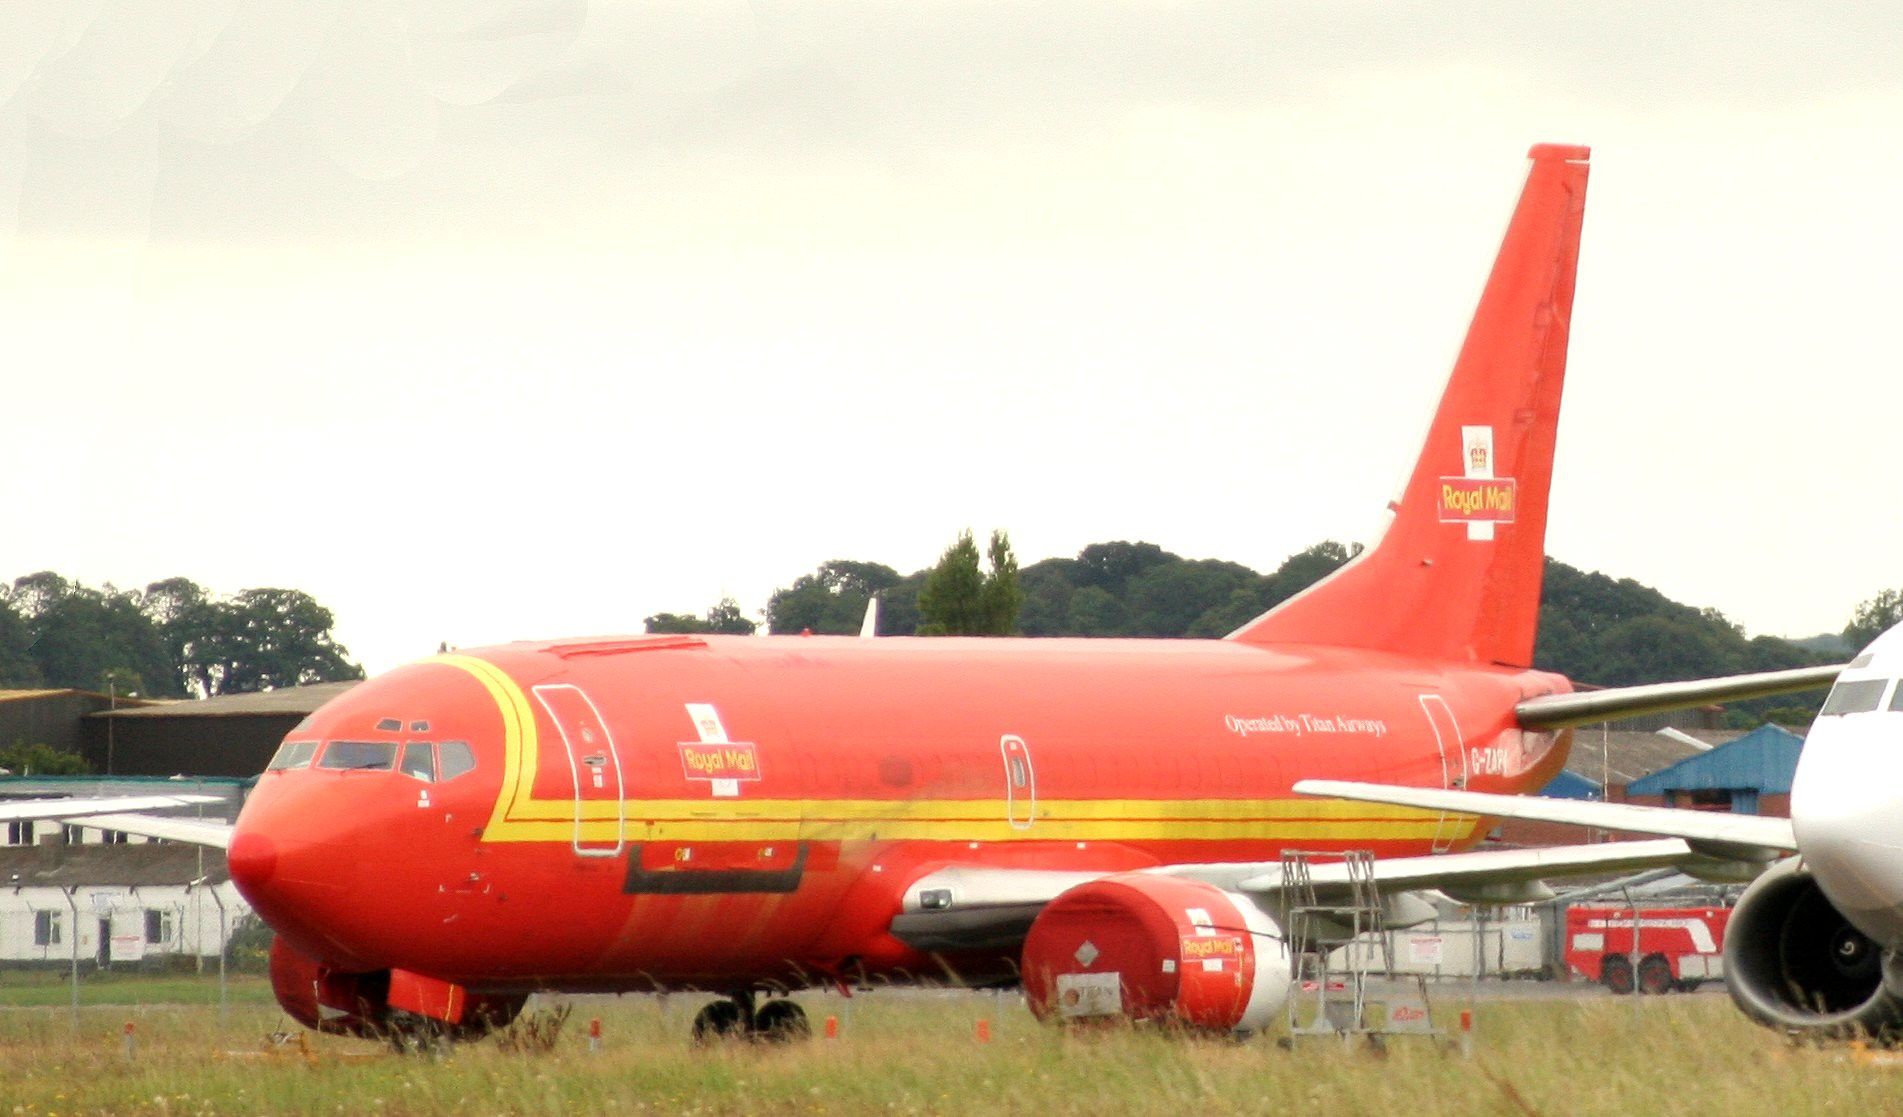 Royal Mail Boeing 737